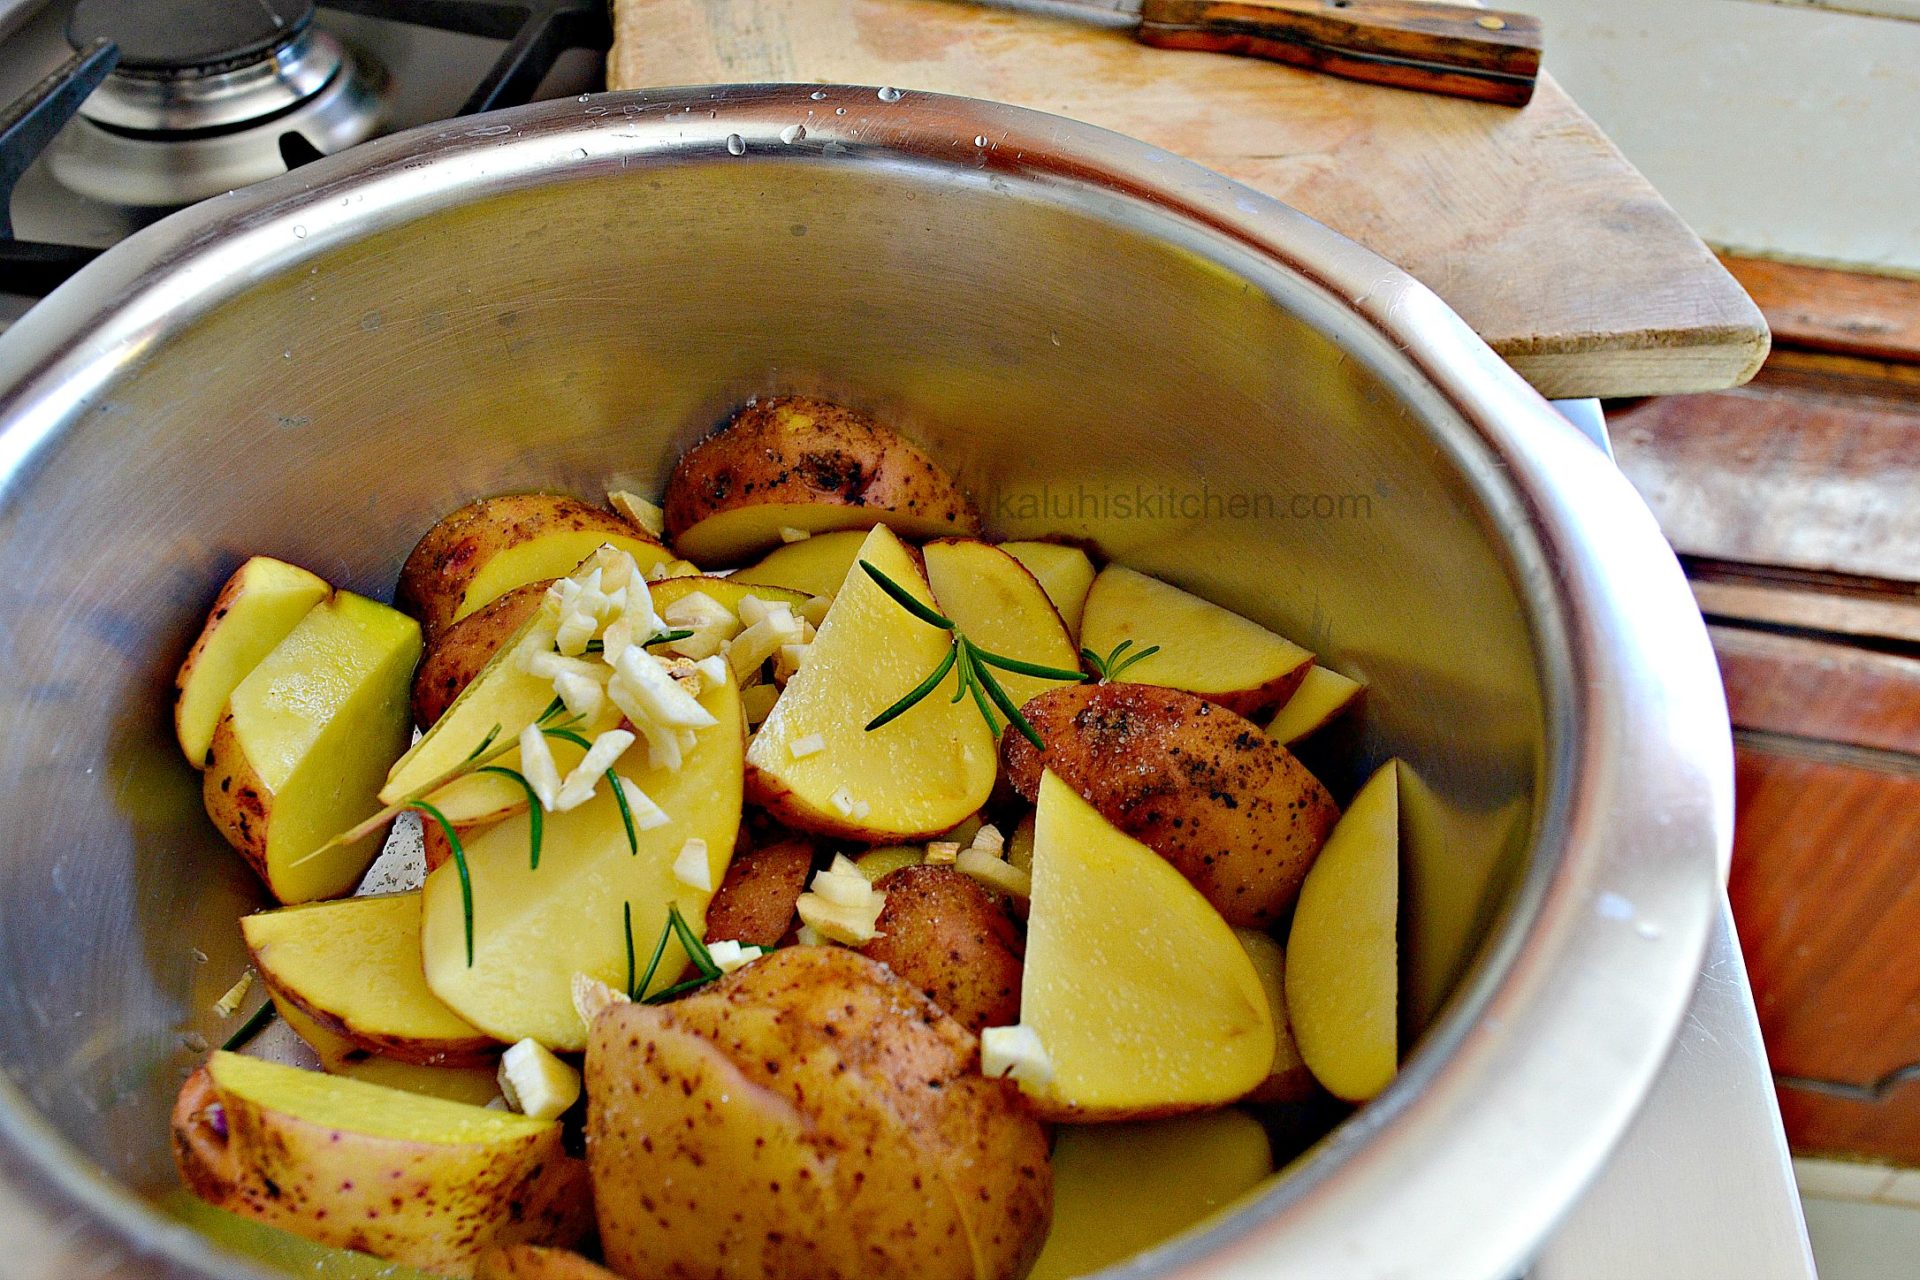 boiling potatoes in fresh rosemary and garlic adds alot of flavor and are well absorbed by the potatoes_kaluhiskitchen.com